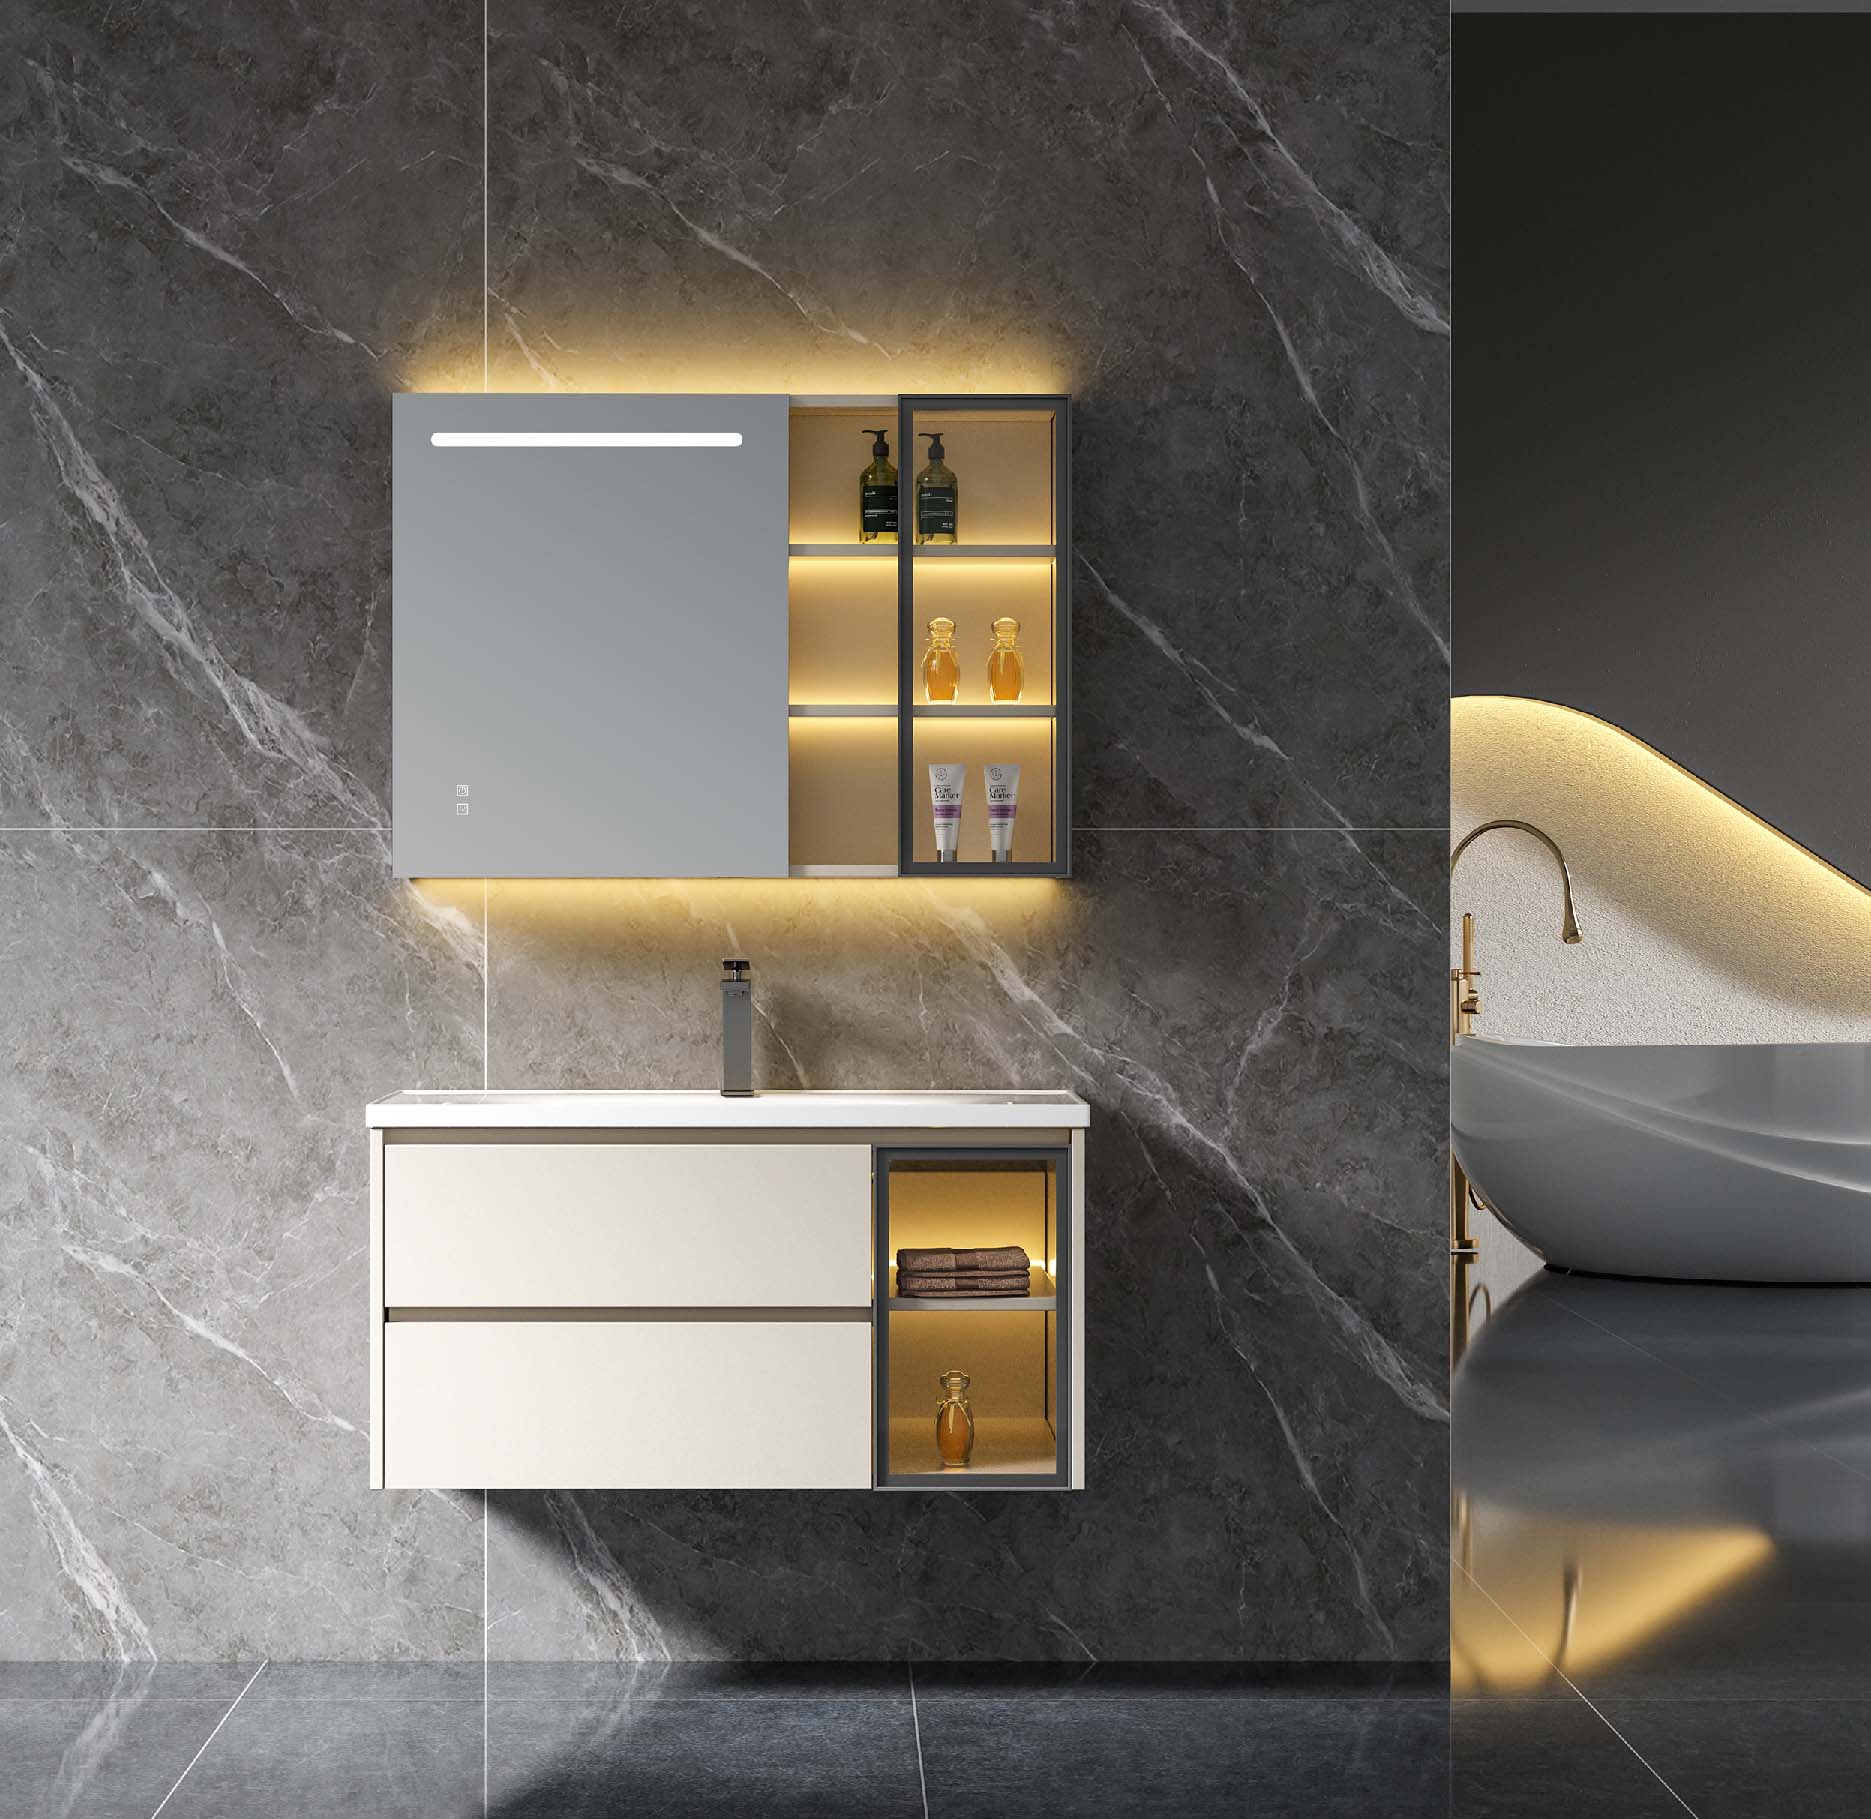 Functionality and Storage with High-End Bathroom Cabinet